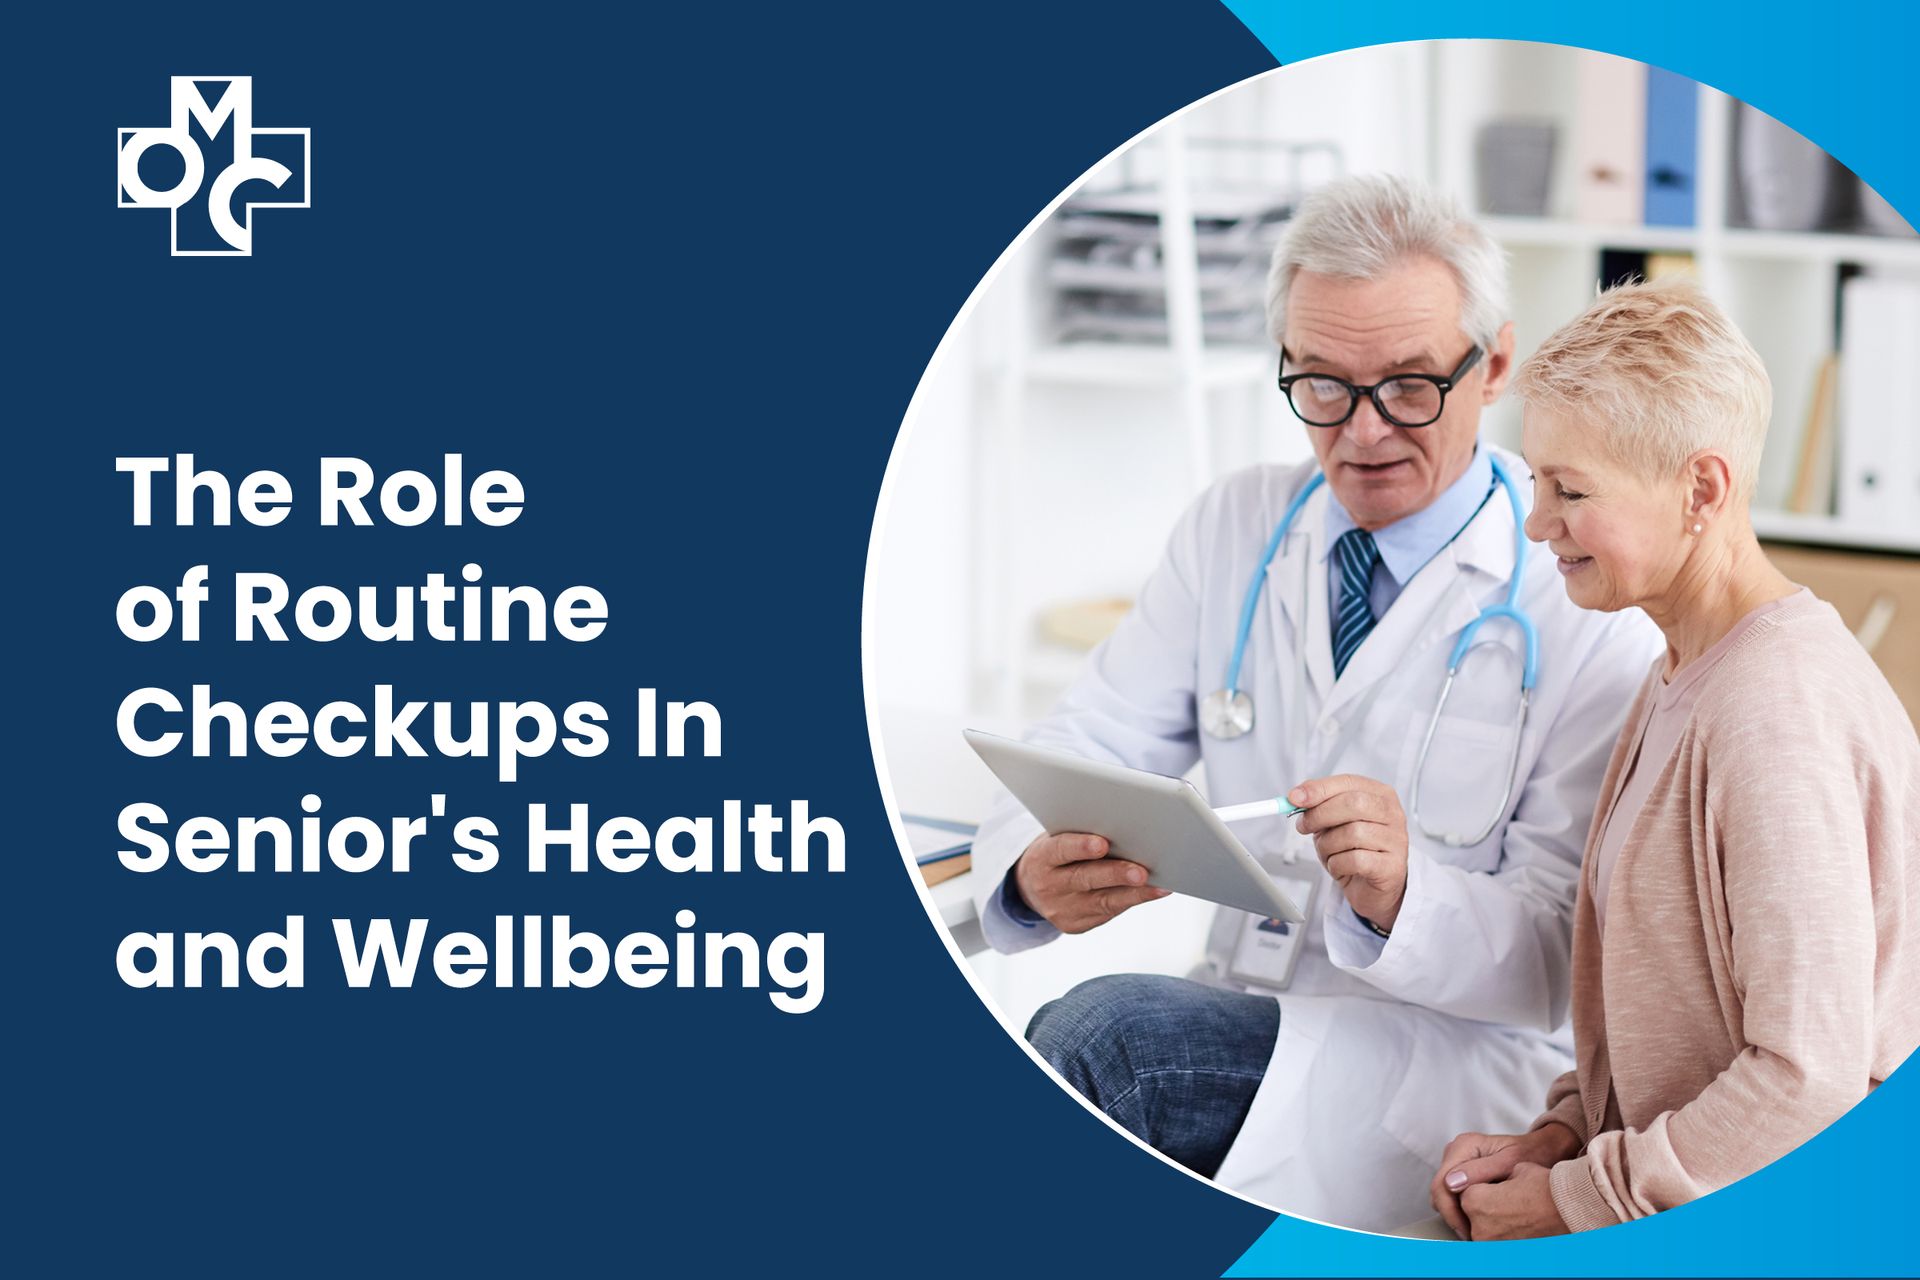 The Role of Routine Checkups In Senior’s Health and Well-being